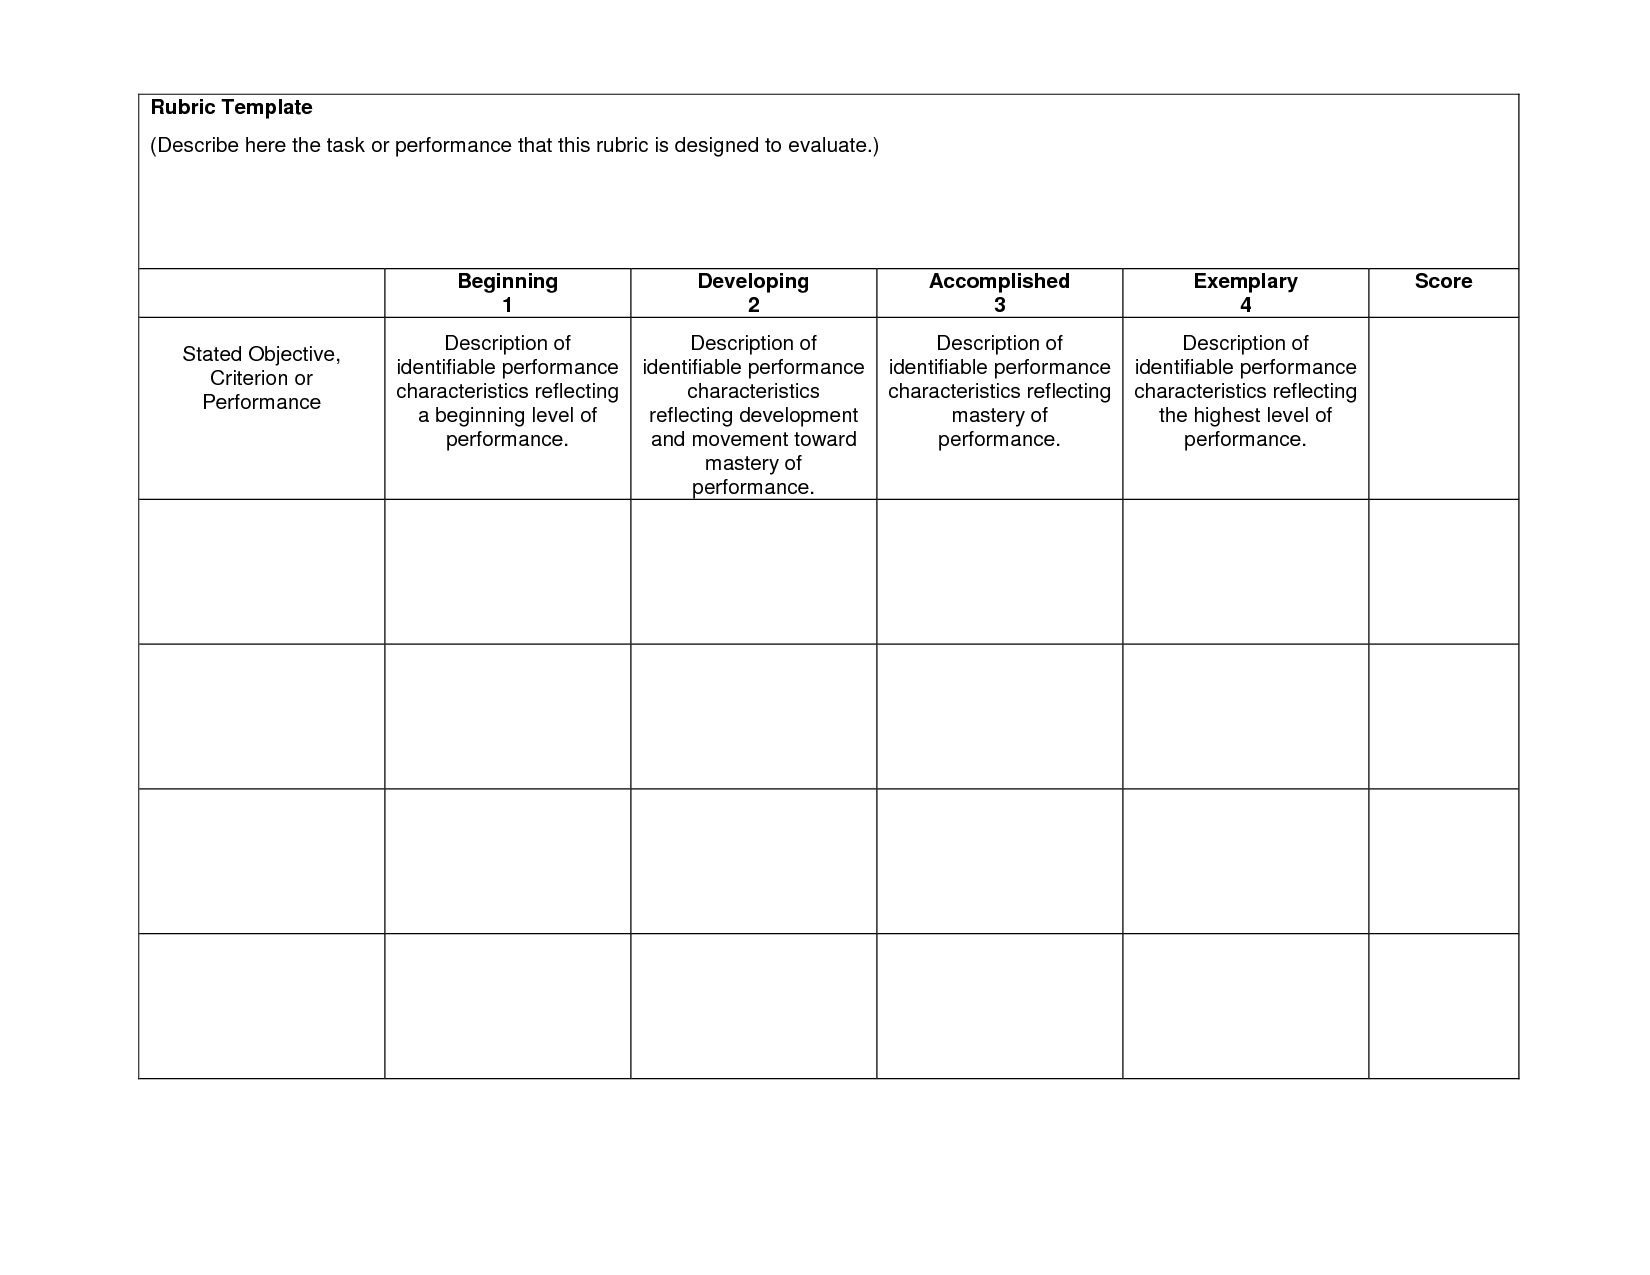 Blank Rubrics To Fill In | Rubric Template - Download Now Doc | Gs - Free Printable Blank Rubrics